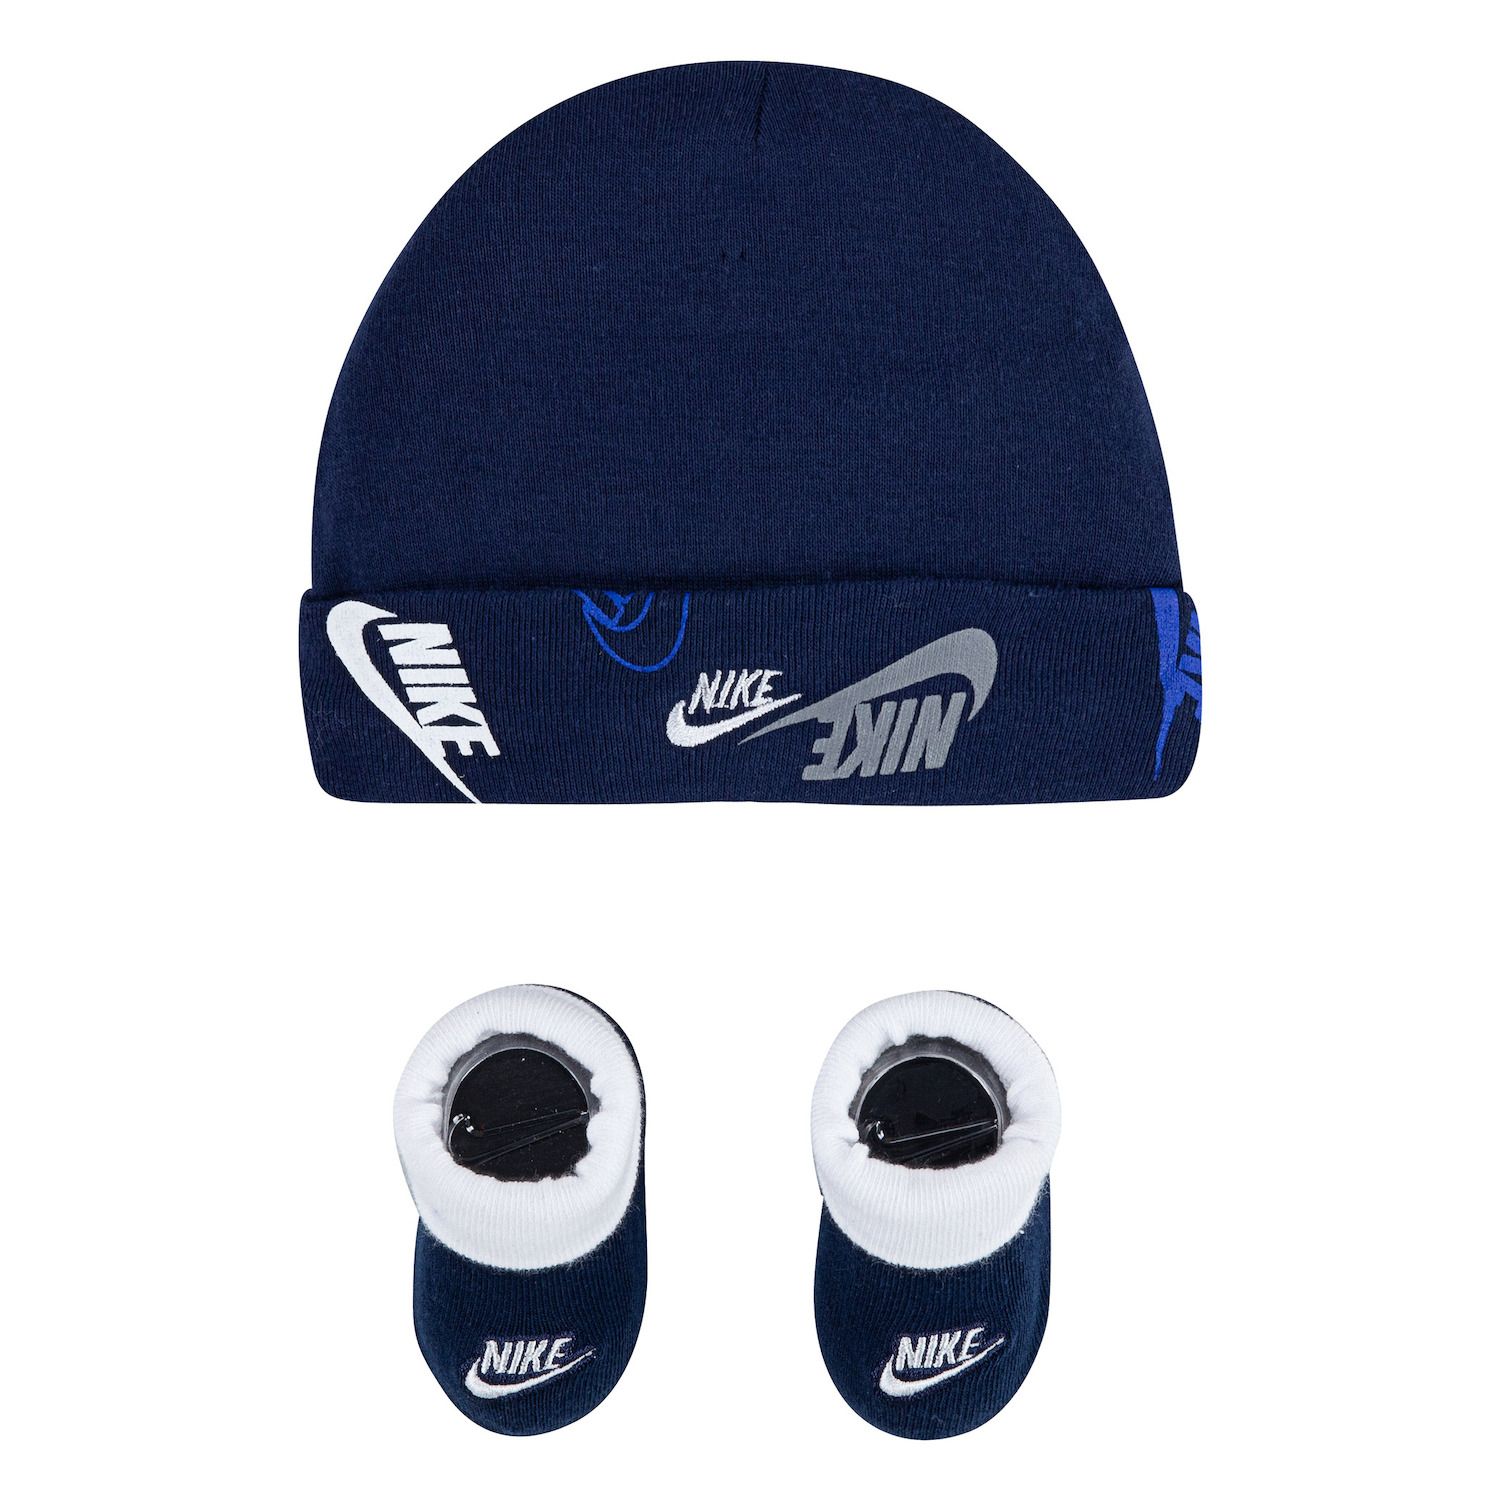 nike baby hat and socks